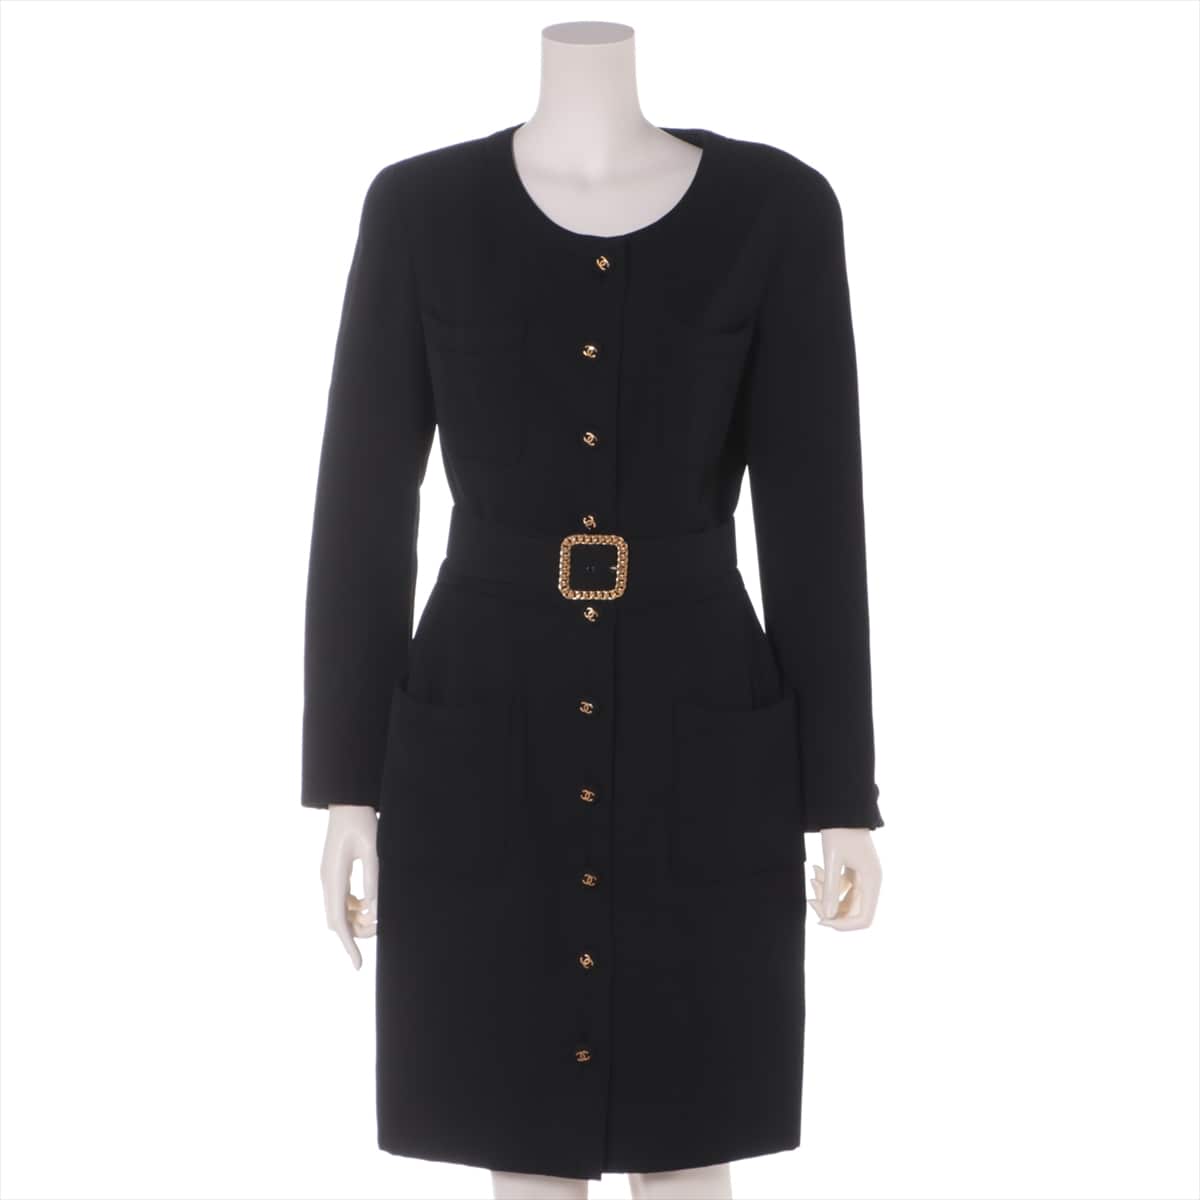 Chanel Unknown material Dress Unknown size Ladies' Black No sign tag